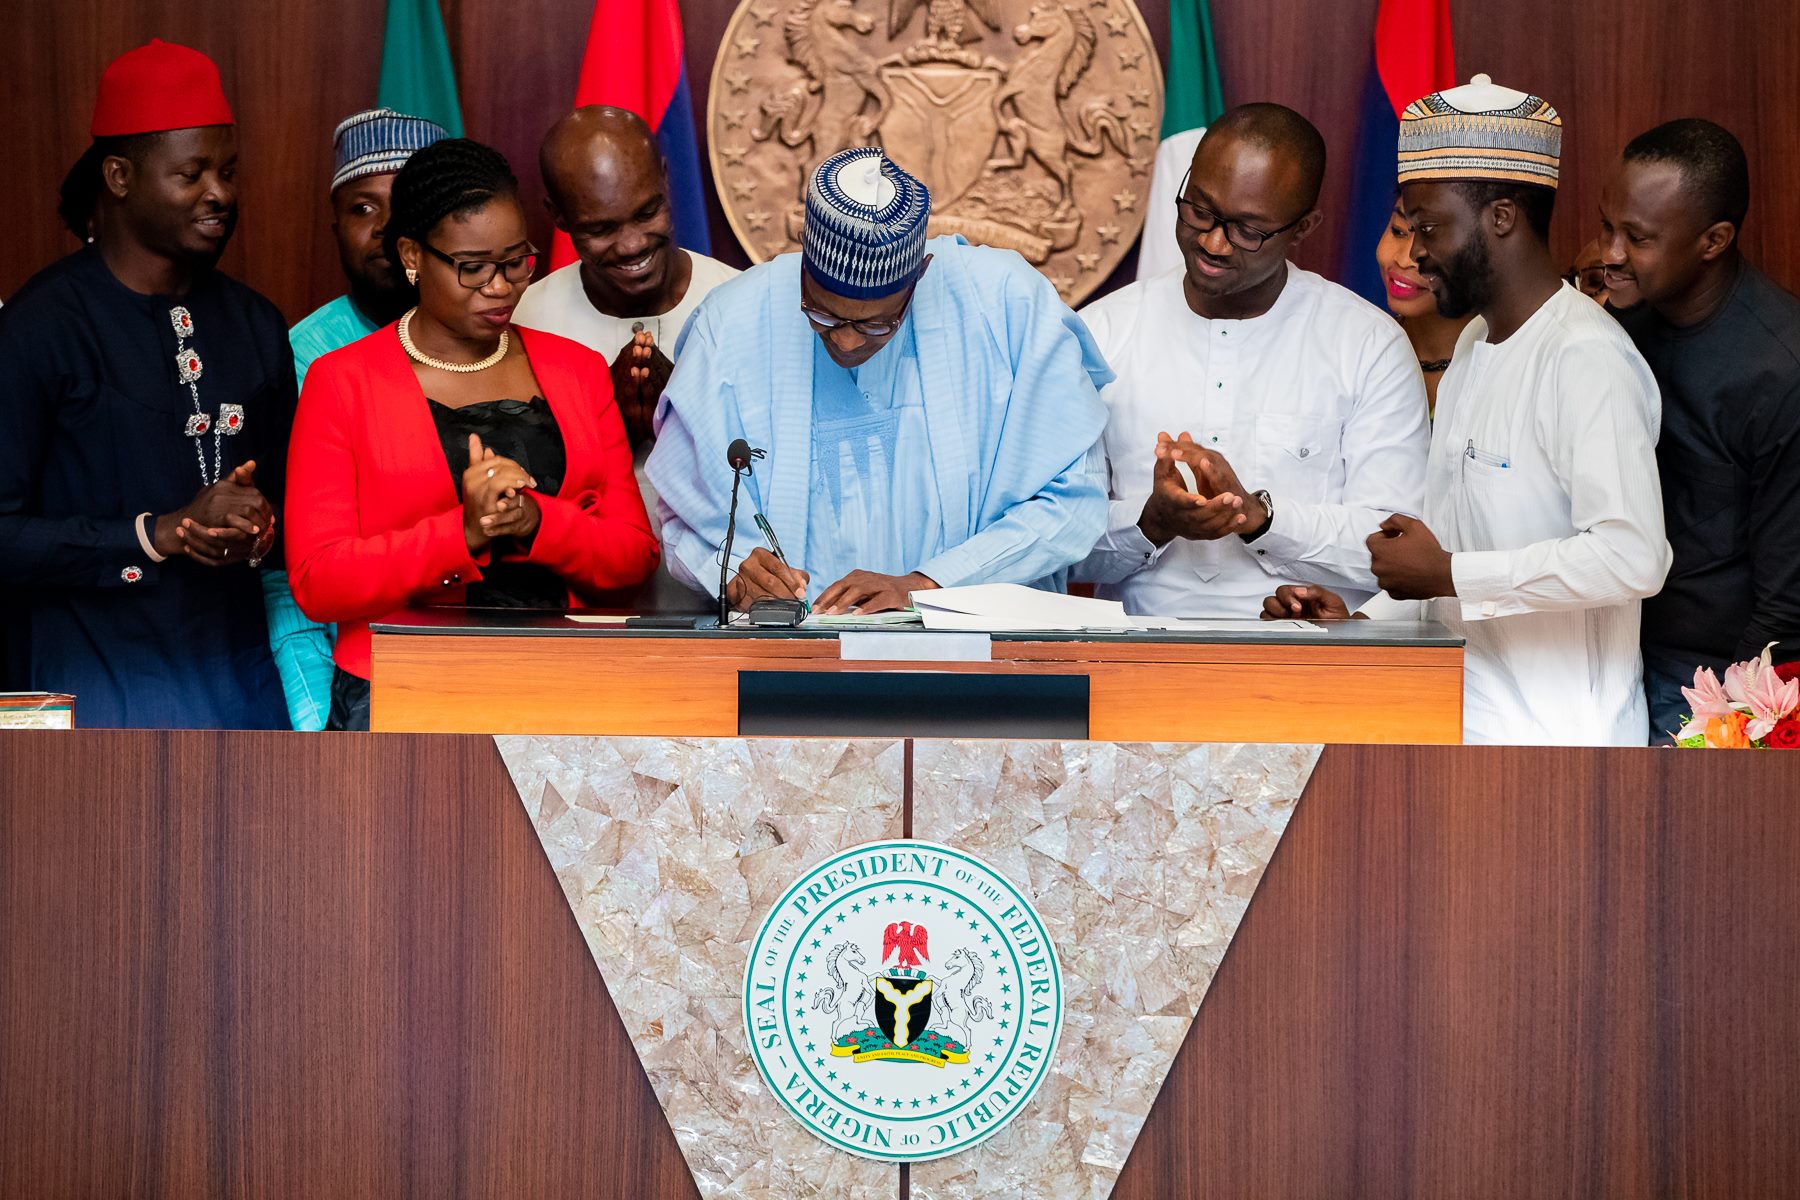 President Buhari signing into law on Thursday at the Presidential Villa, Abuja, the Not Too Young To Run bill. With him are members of the Not Too Young To Run Movement led by its coordinator, Samson Itodo(Third from right)